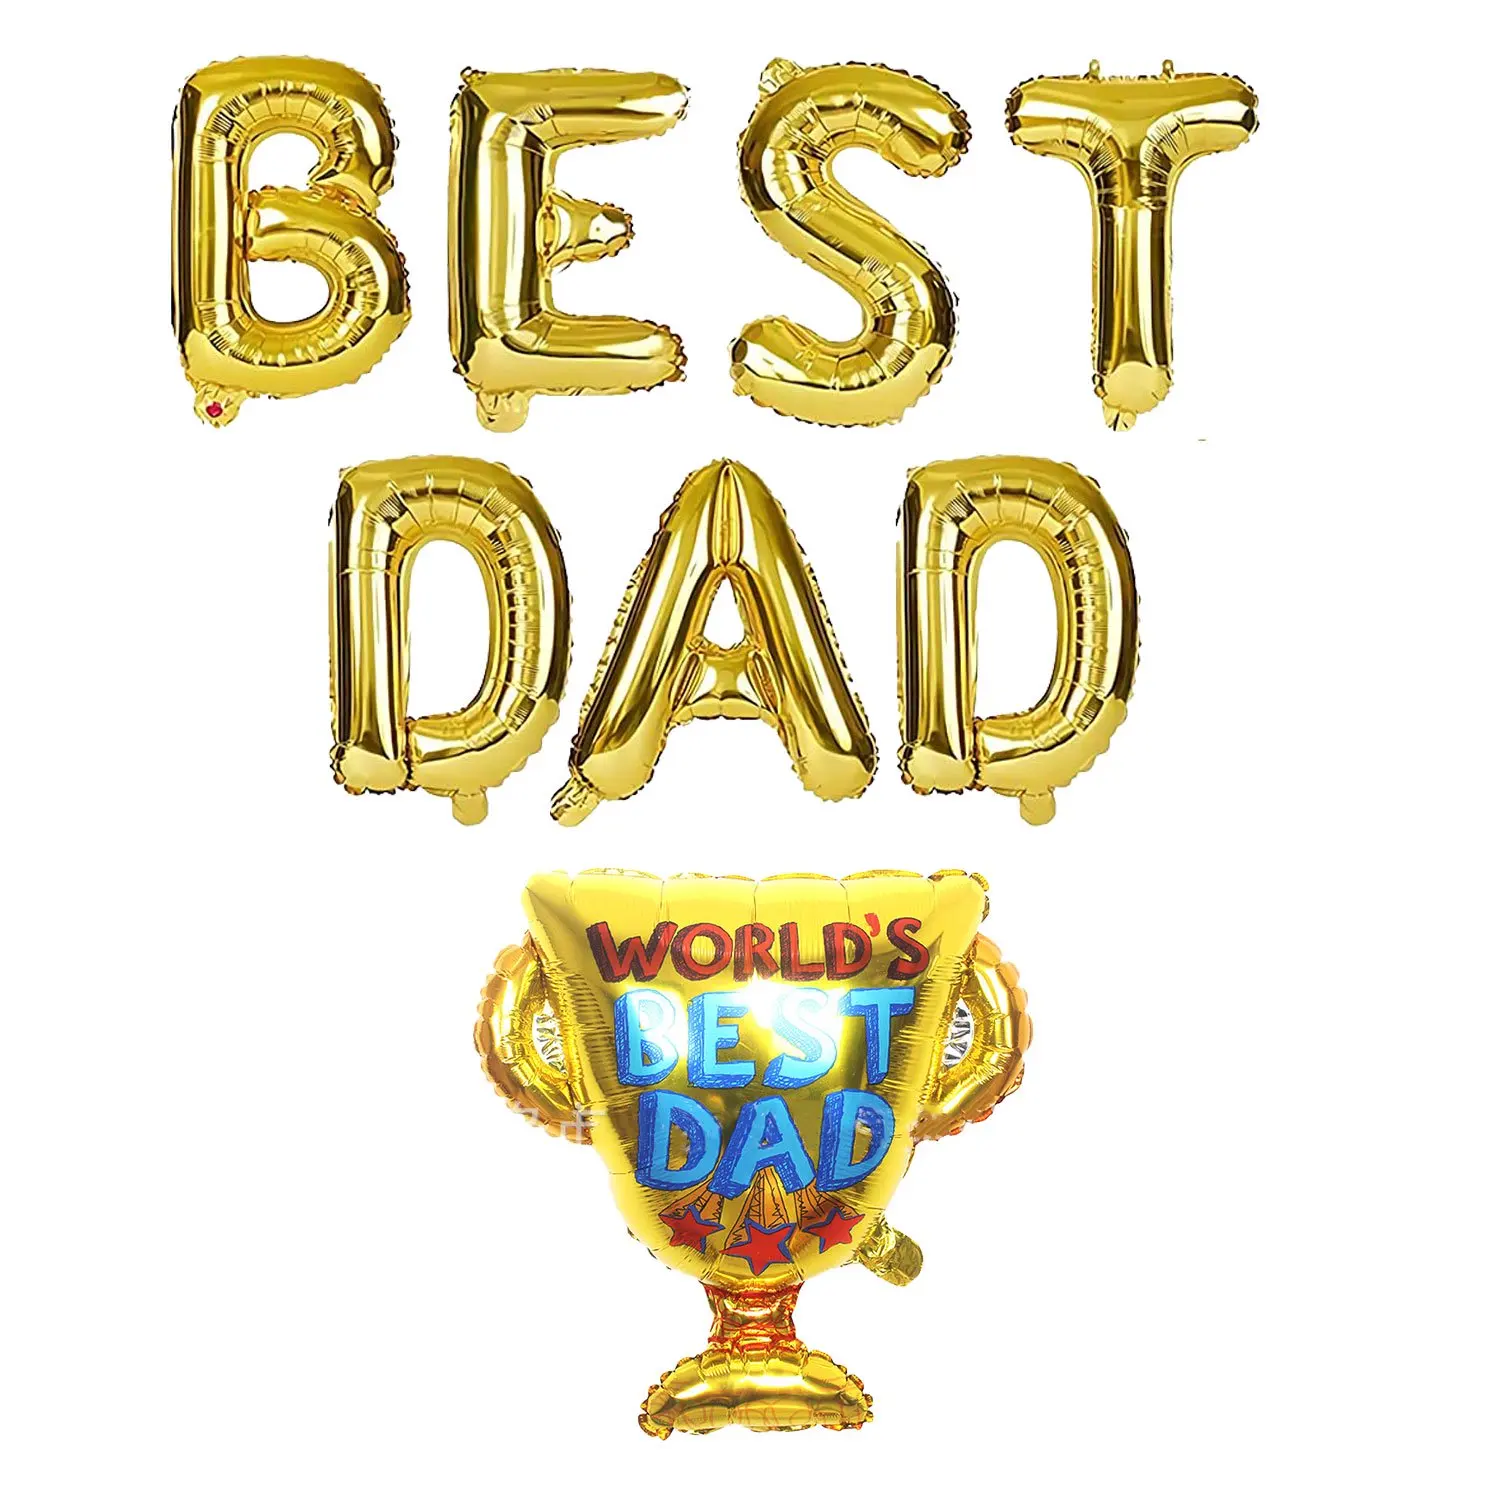 Best Dad Foil Balloons Decorations Happy Father's Day Party Supplie Gold Trophy Foil Balloon Gift for Dad's Birthday Party Decor